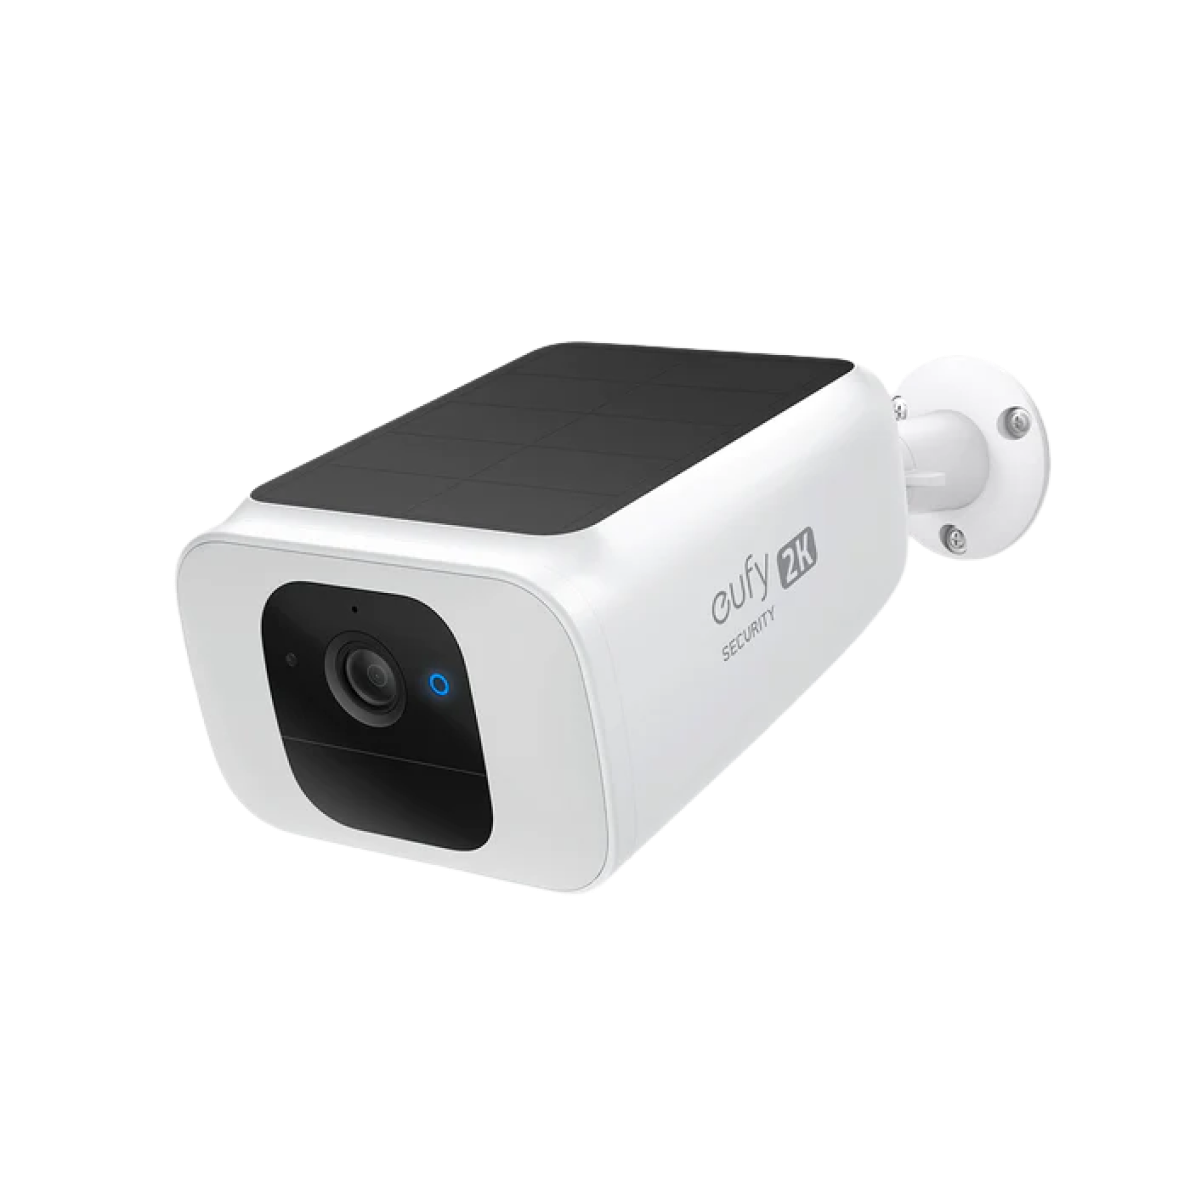 Buy Battery Powered Security Cameras Online - eufy US